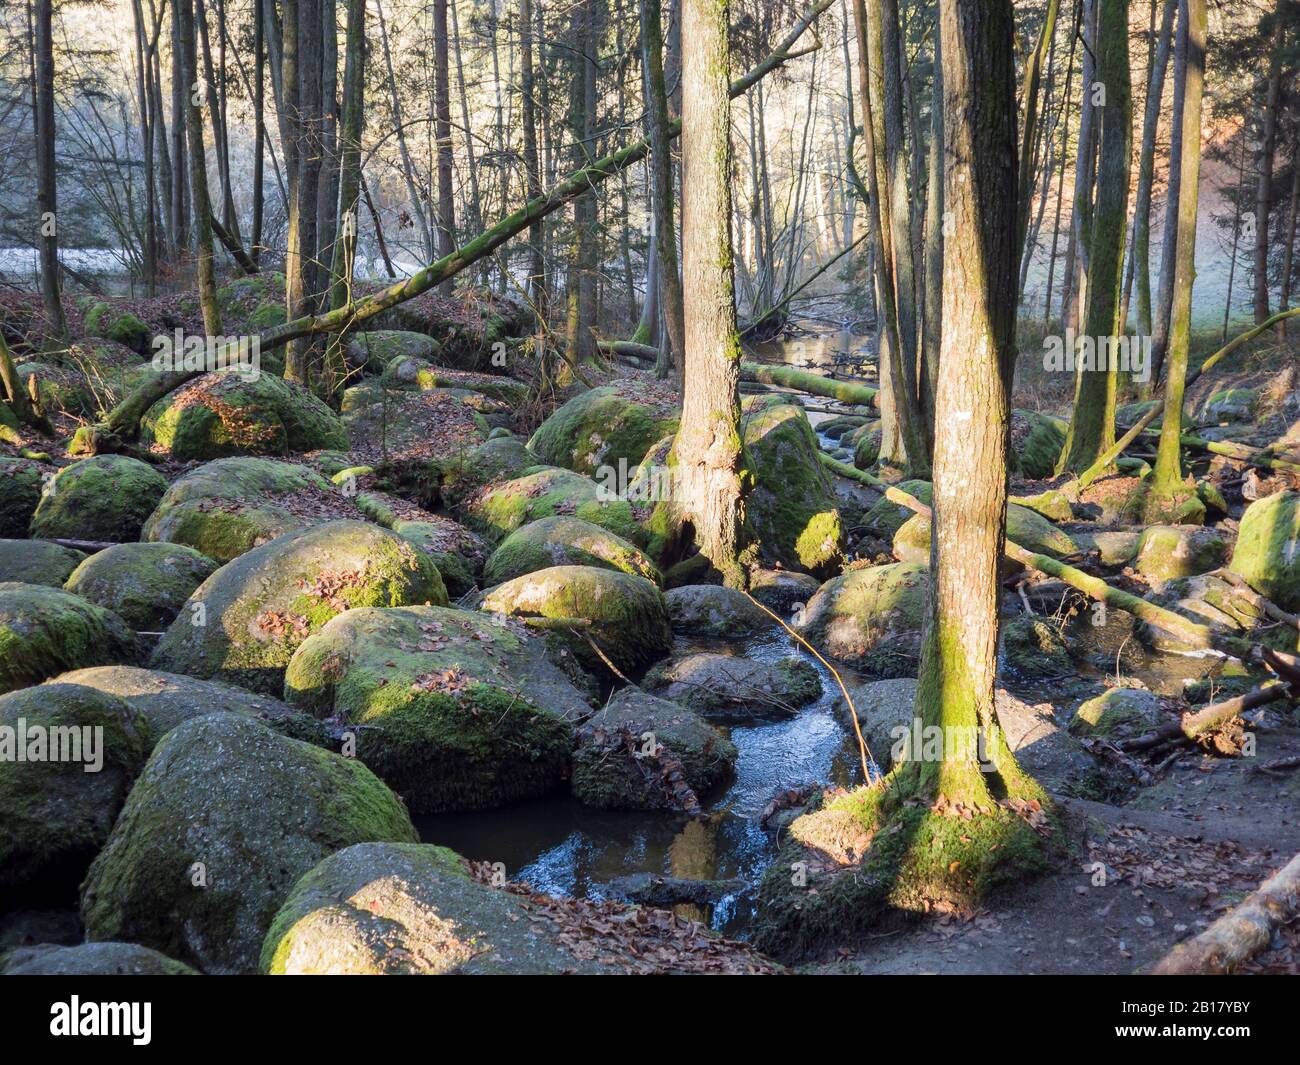 Germany, Bavaria, Stream flowing between mossy boulders in Upper Palatinate Forest Stock Photo